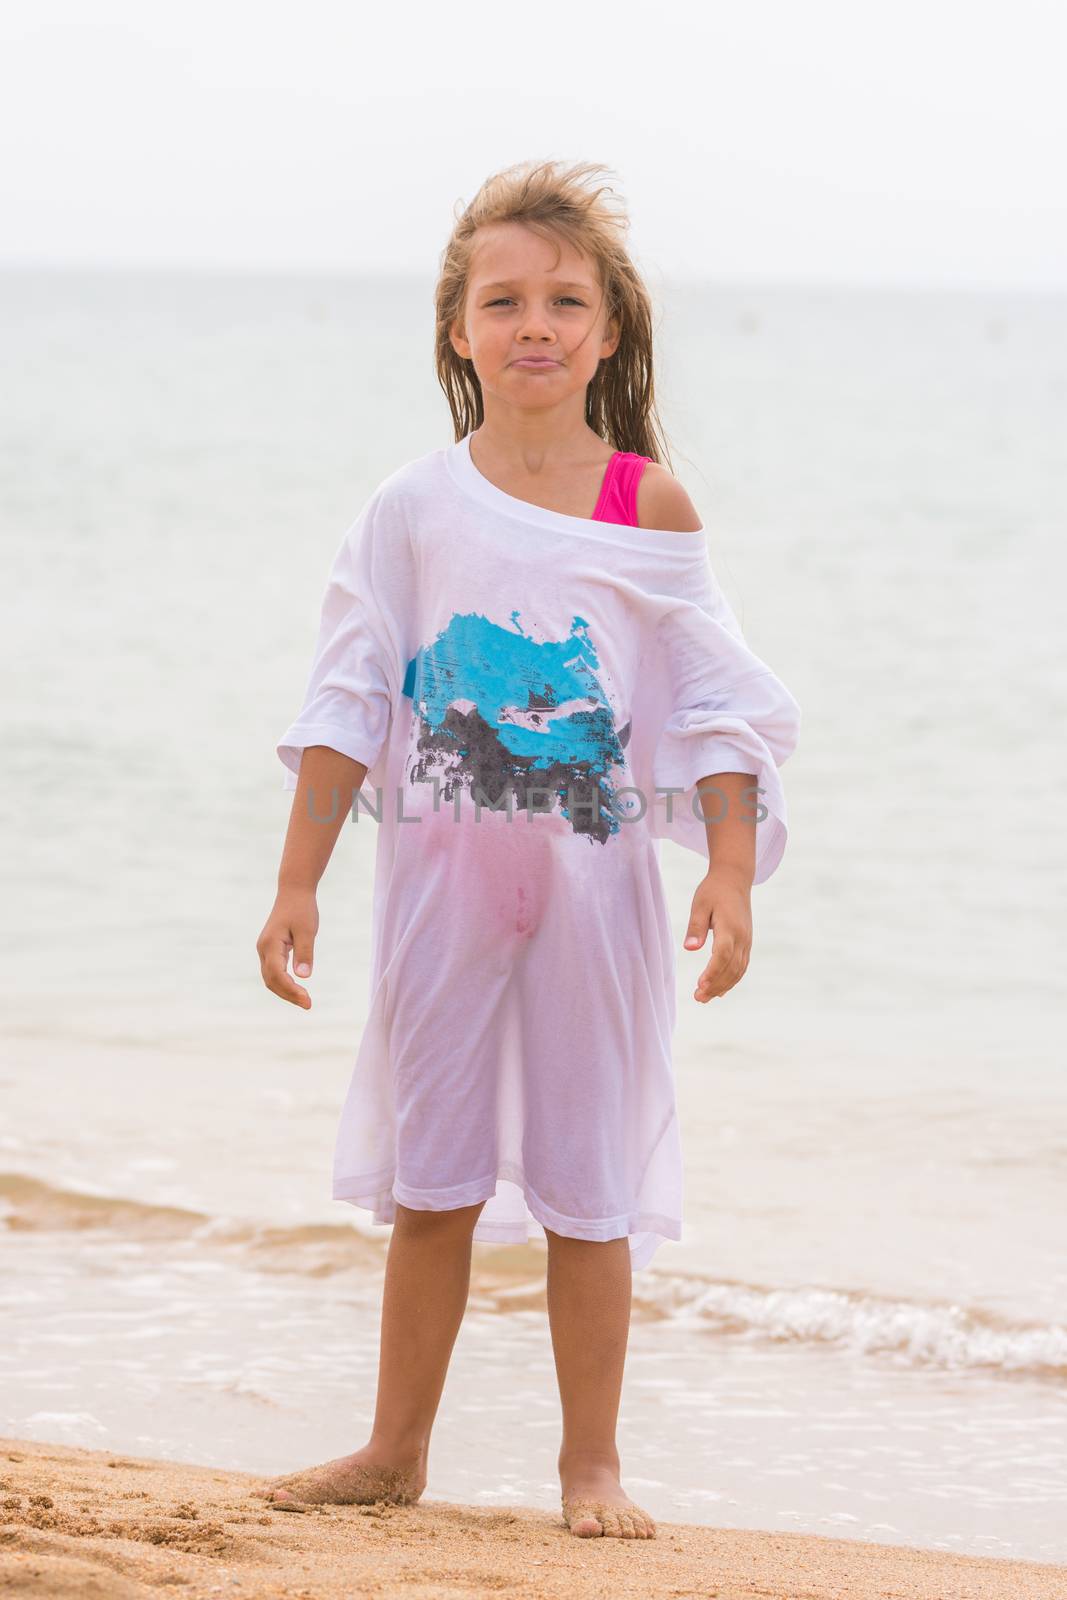 Girl poses funny faces standing on the beach in my father's shirt by Madhourse